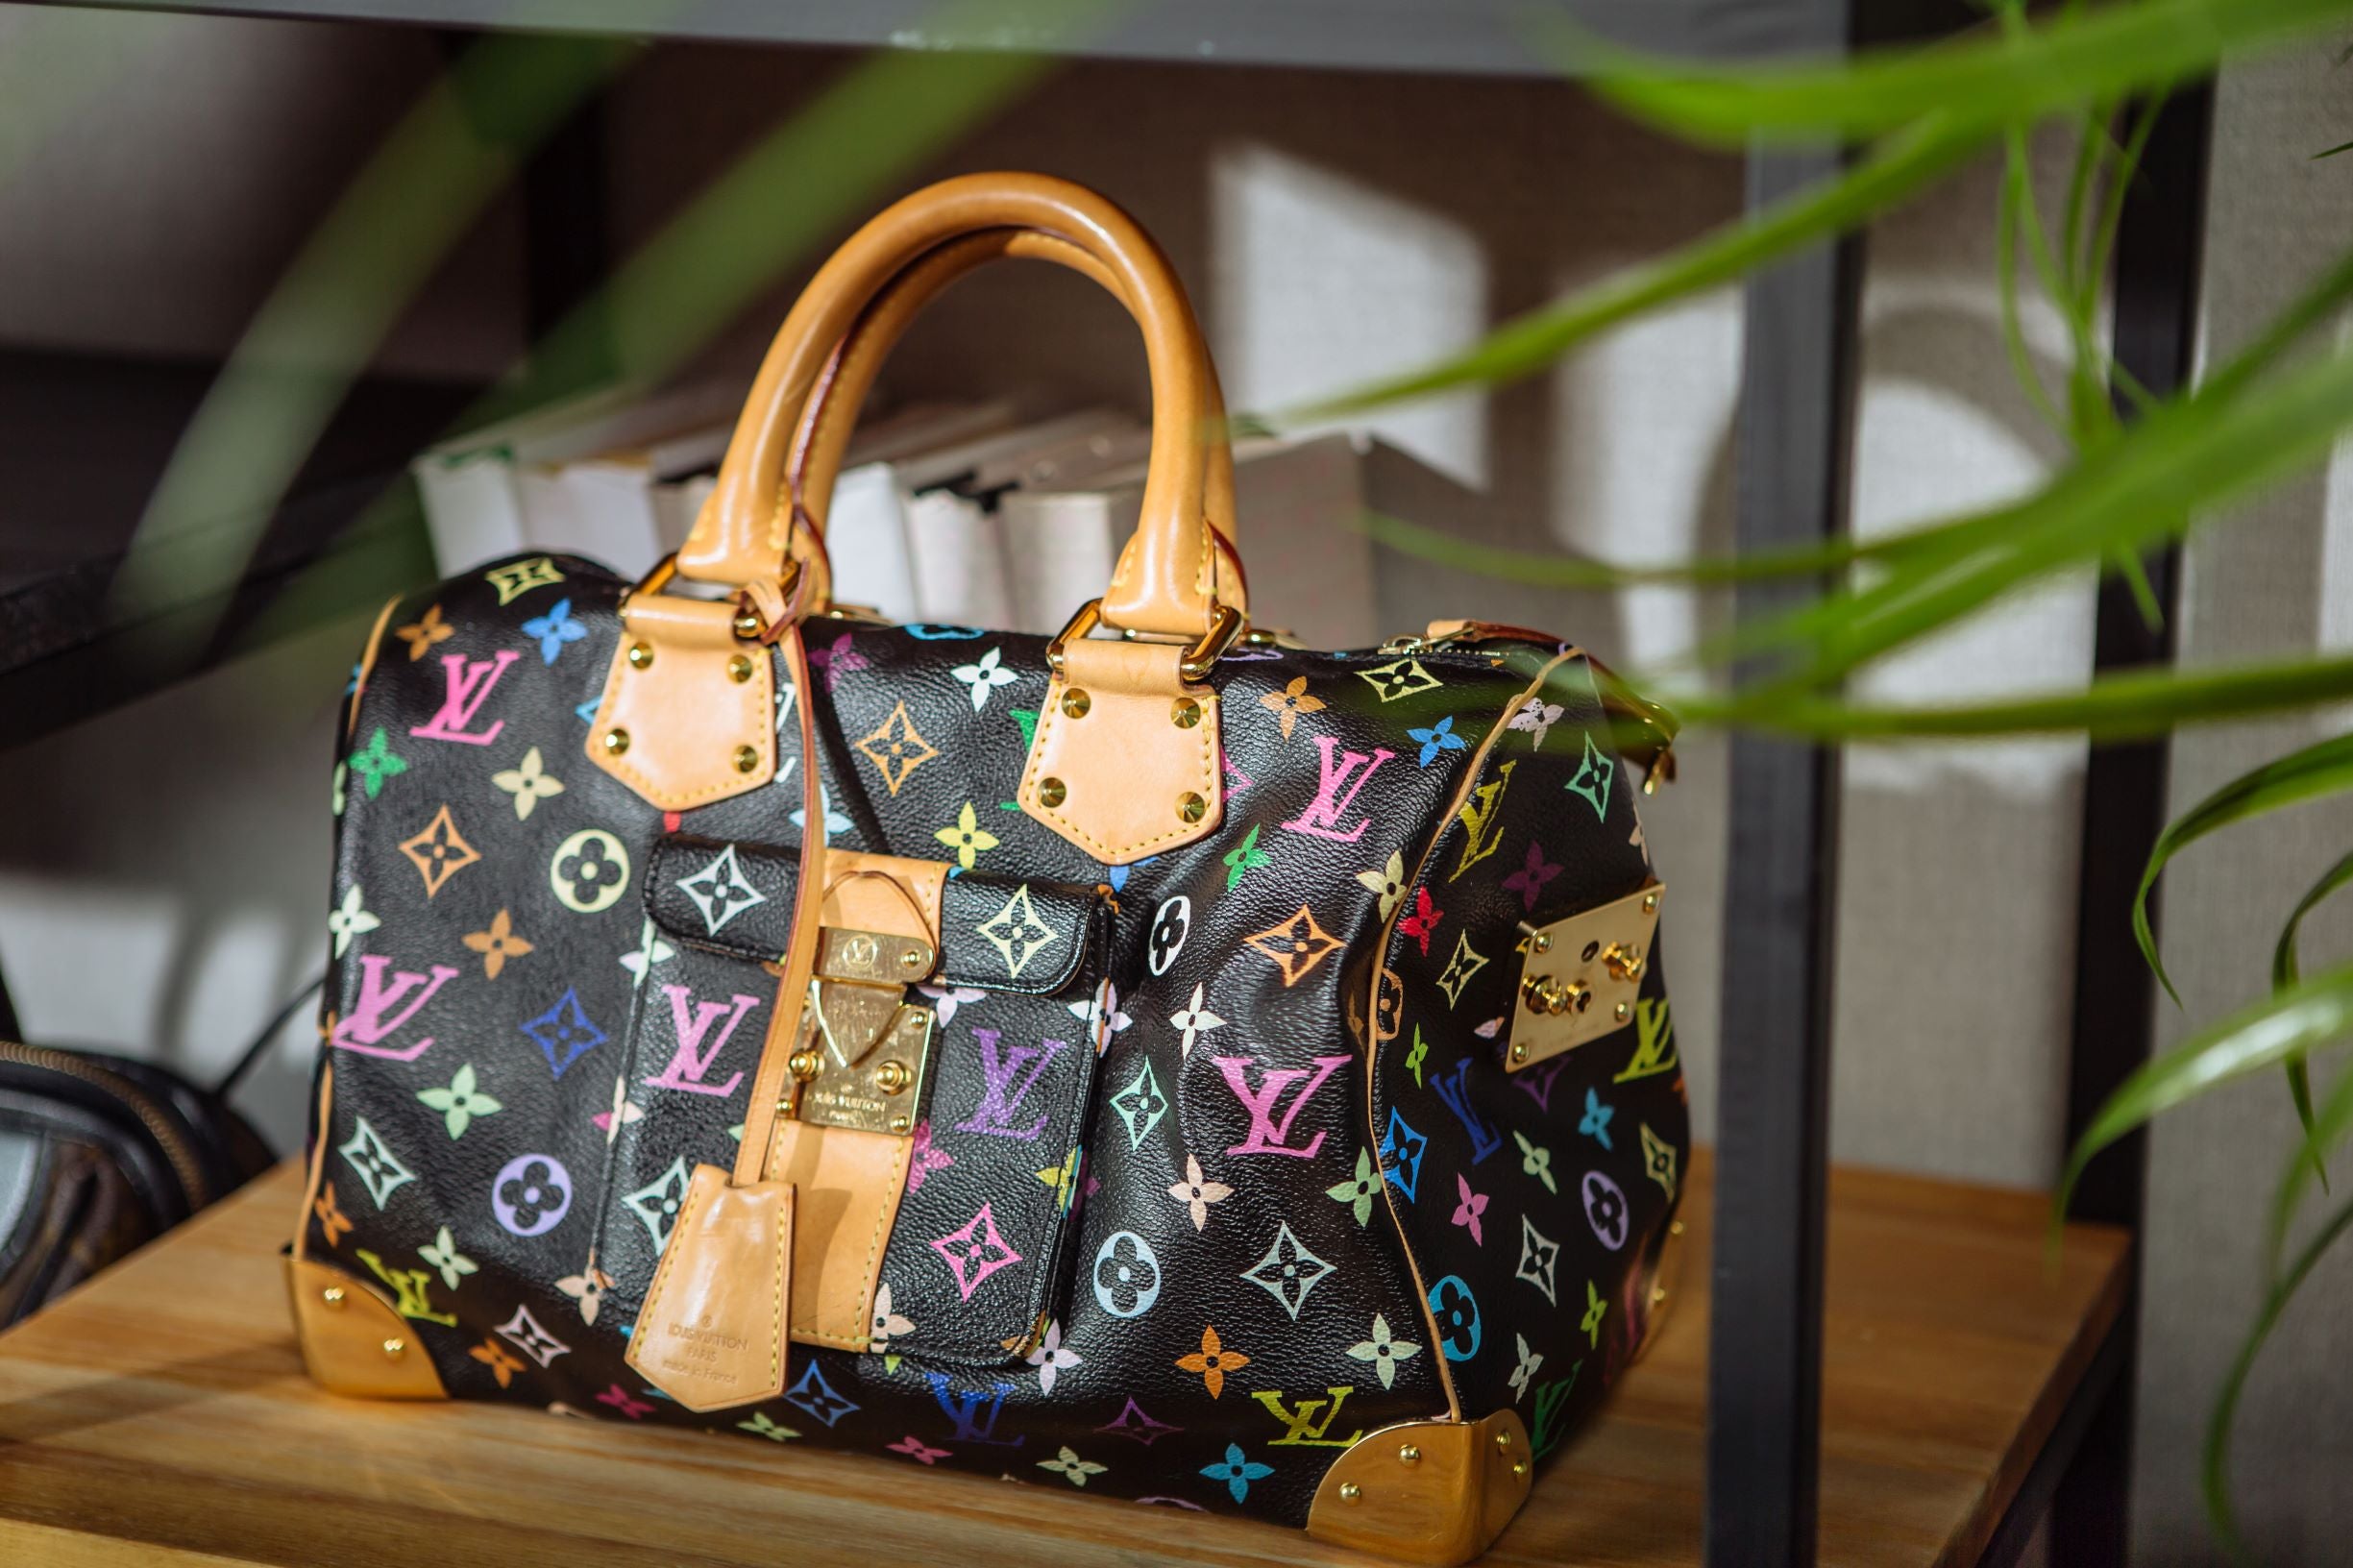 Louis Vuitton on X: Mixing prints. Zebra, cheetah, and leopard motifs have  taken over the #LouisVuitton Monogram in the new Jungle capsule. Find the  new line of bags and accessories at